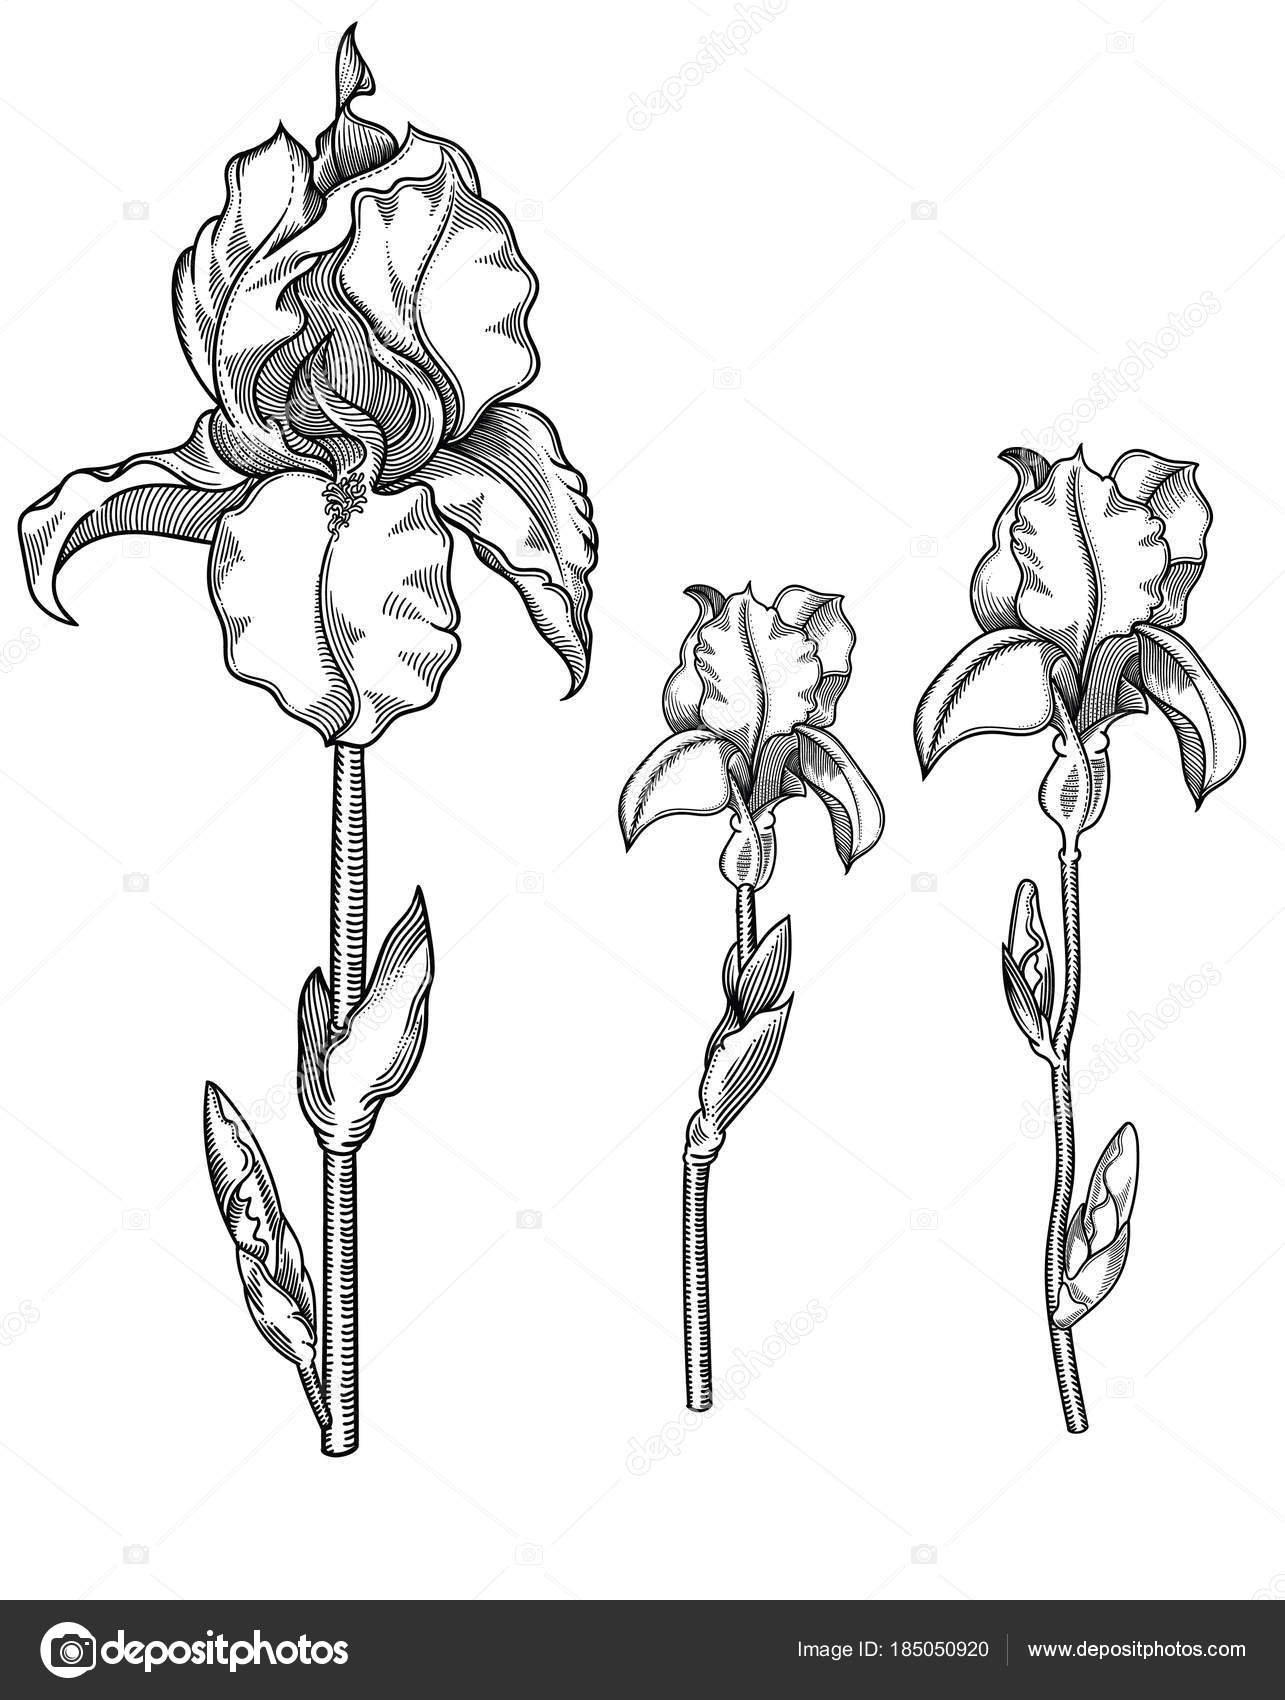 Hand Drawn Sketch Of Black And White Blooming Iris Flowers Detailed Illustration Of Decorative Flowers In Line Style Isolated On White Background Rises Very Detailed And Accurate Sketchy Style Line Art Flora